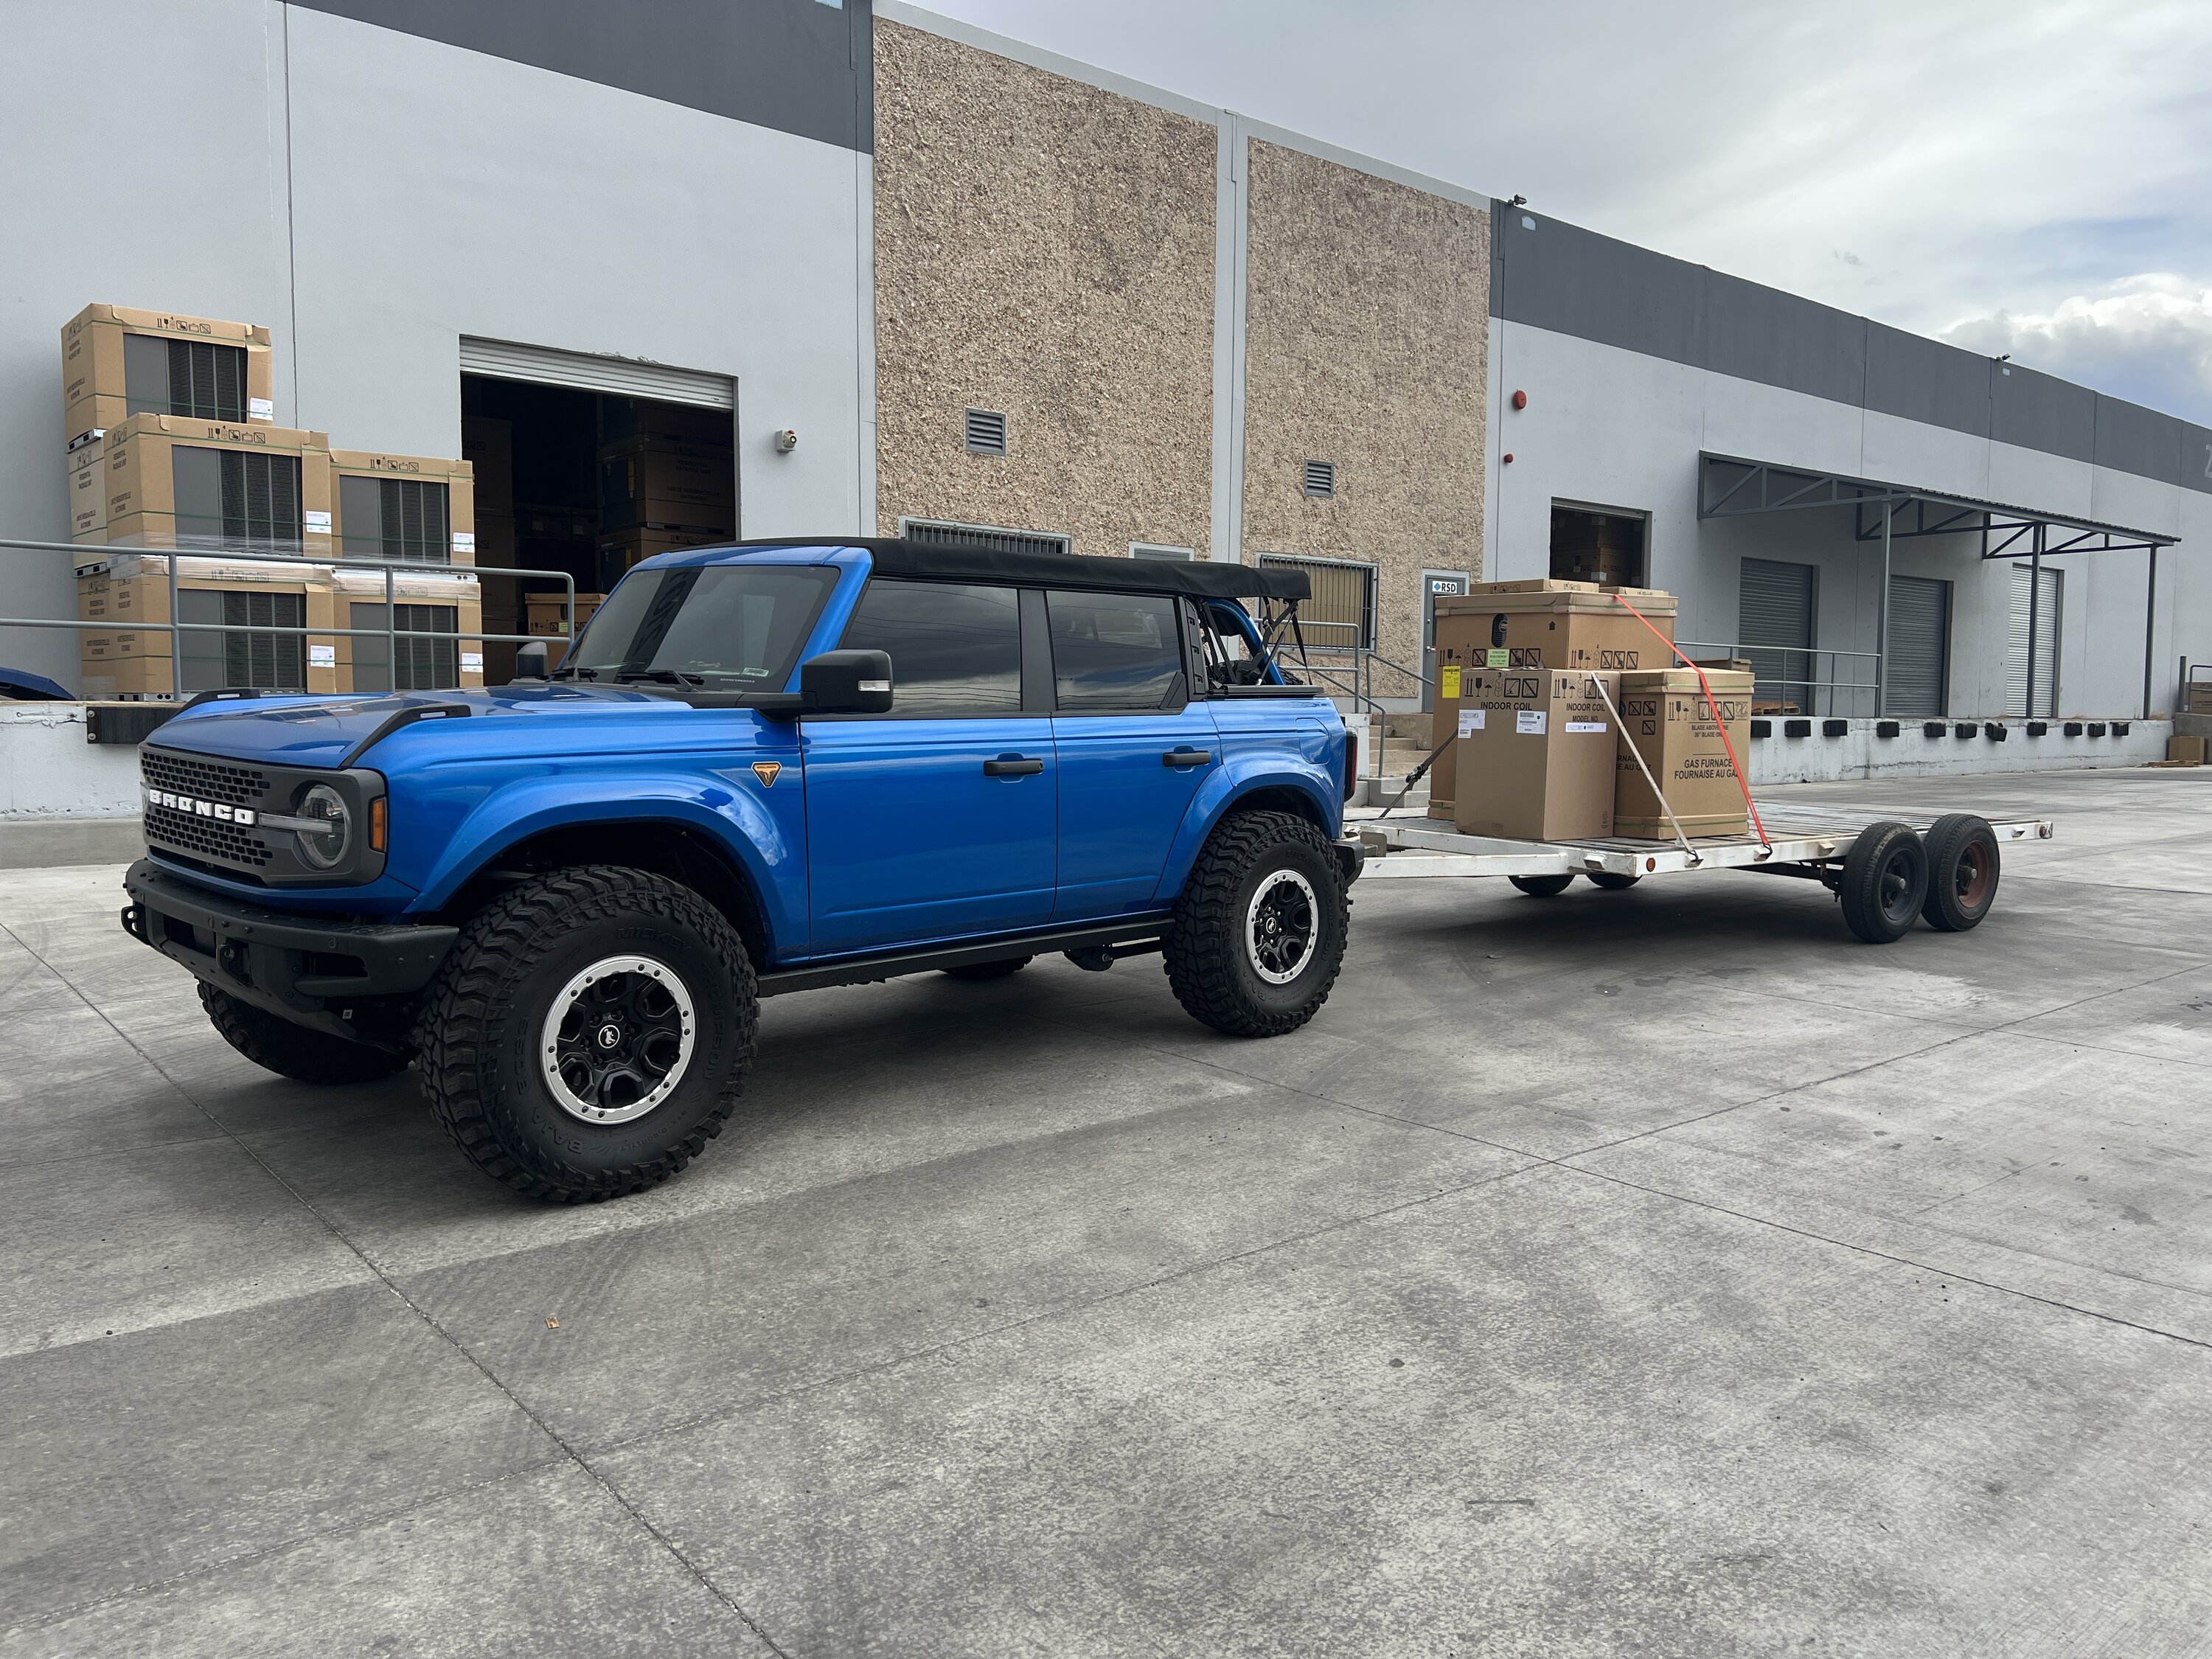 Ford Bronco Sasquatch package + Lift: What is the recommendation to add 37's? B2B02DF3-730A-4998-B49B-7D40532AD89F